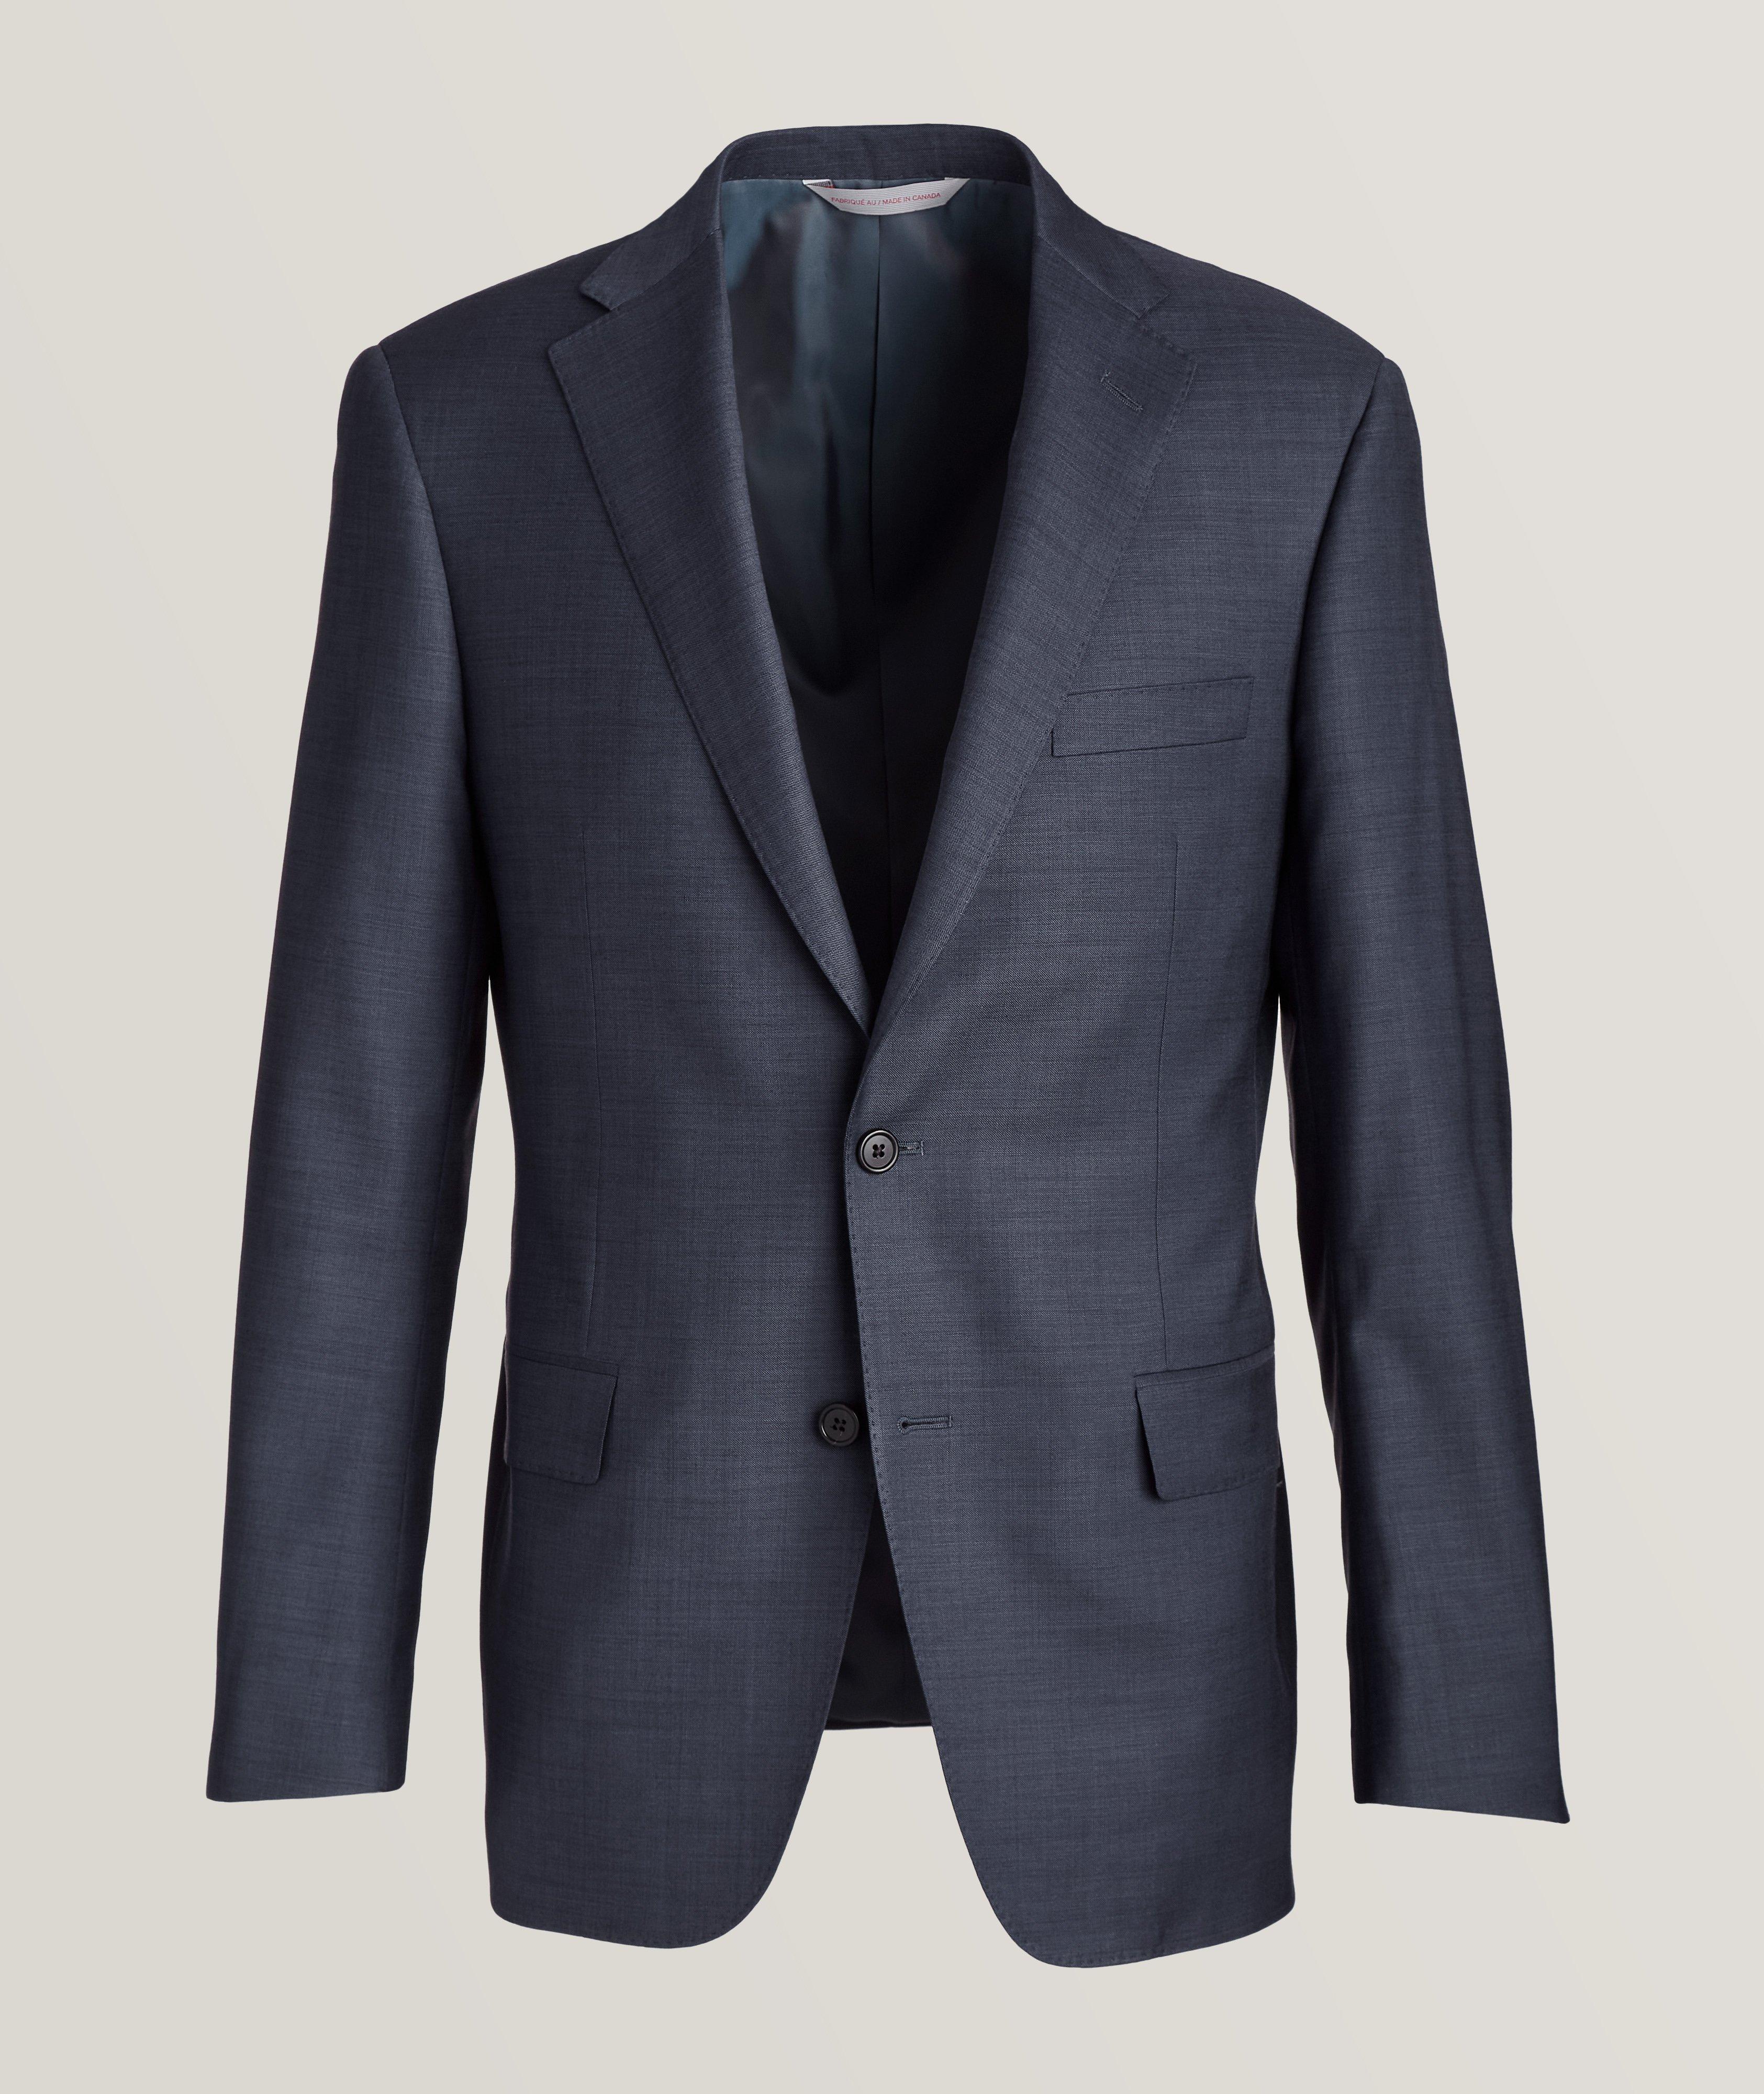 Cosmo Tonal Soft Check Wool Suit image 0